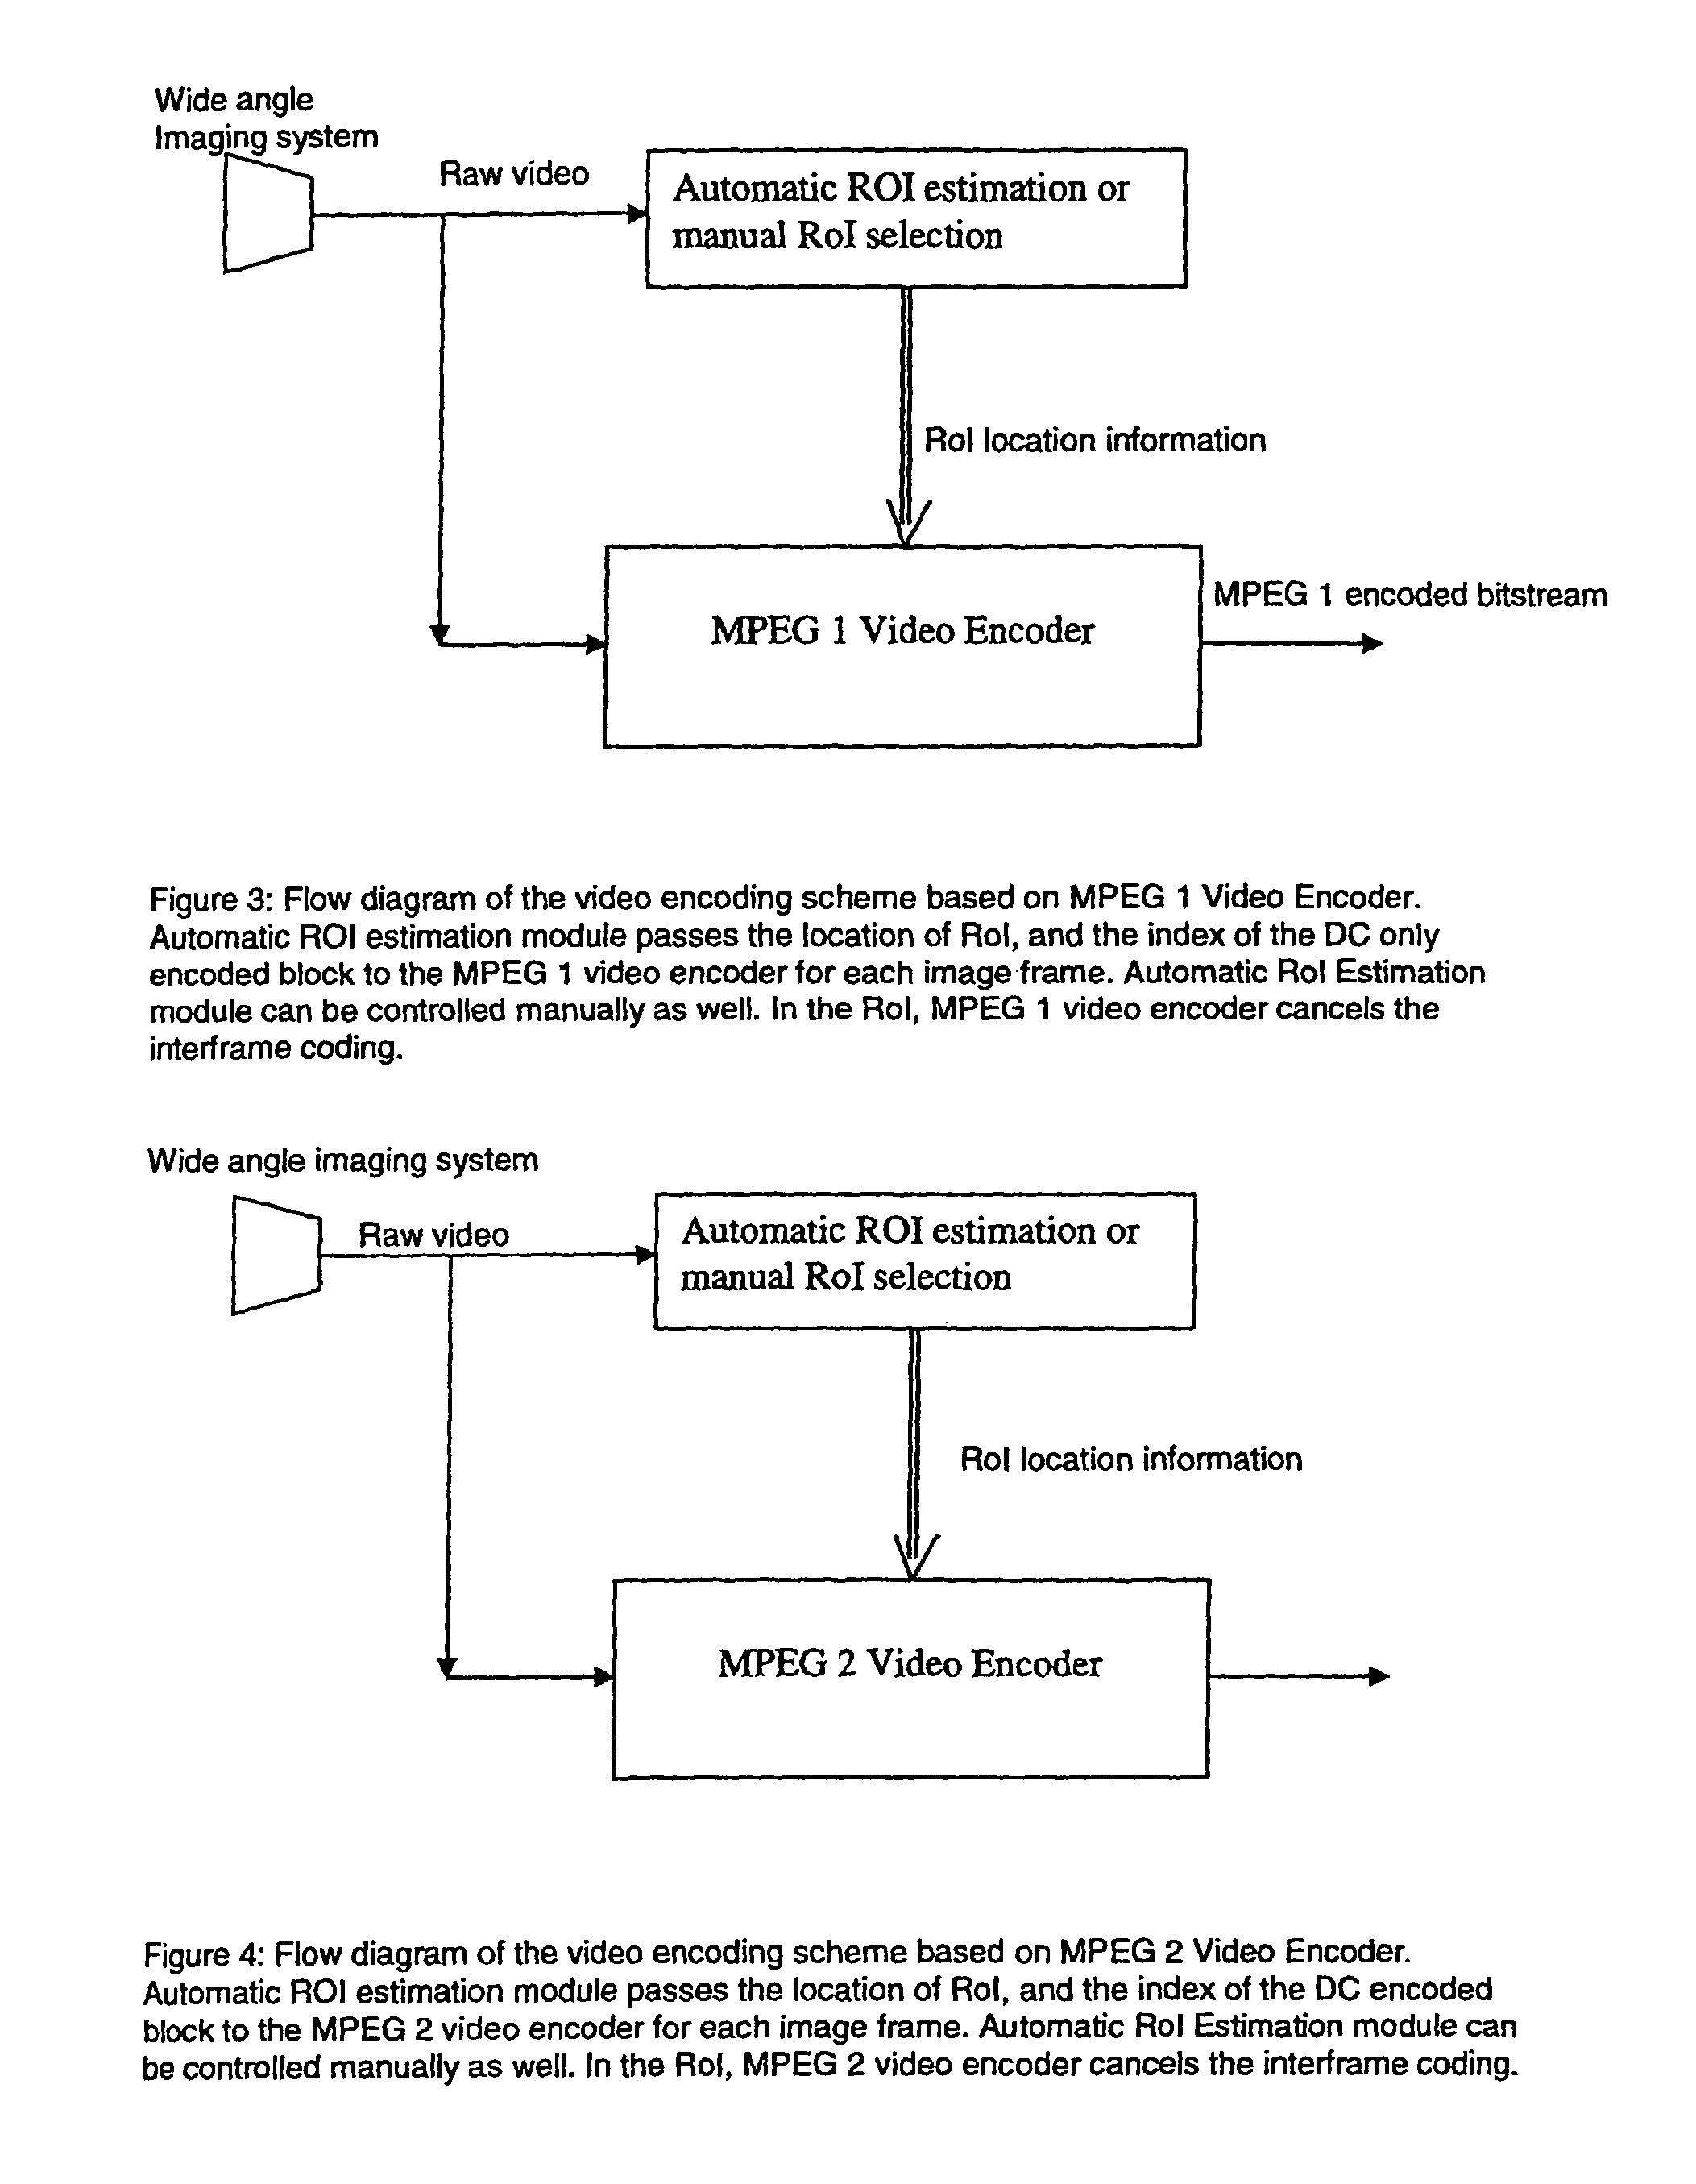 Method of compression for wide angle digital video